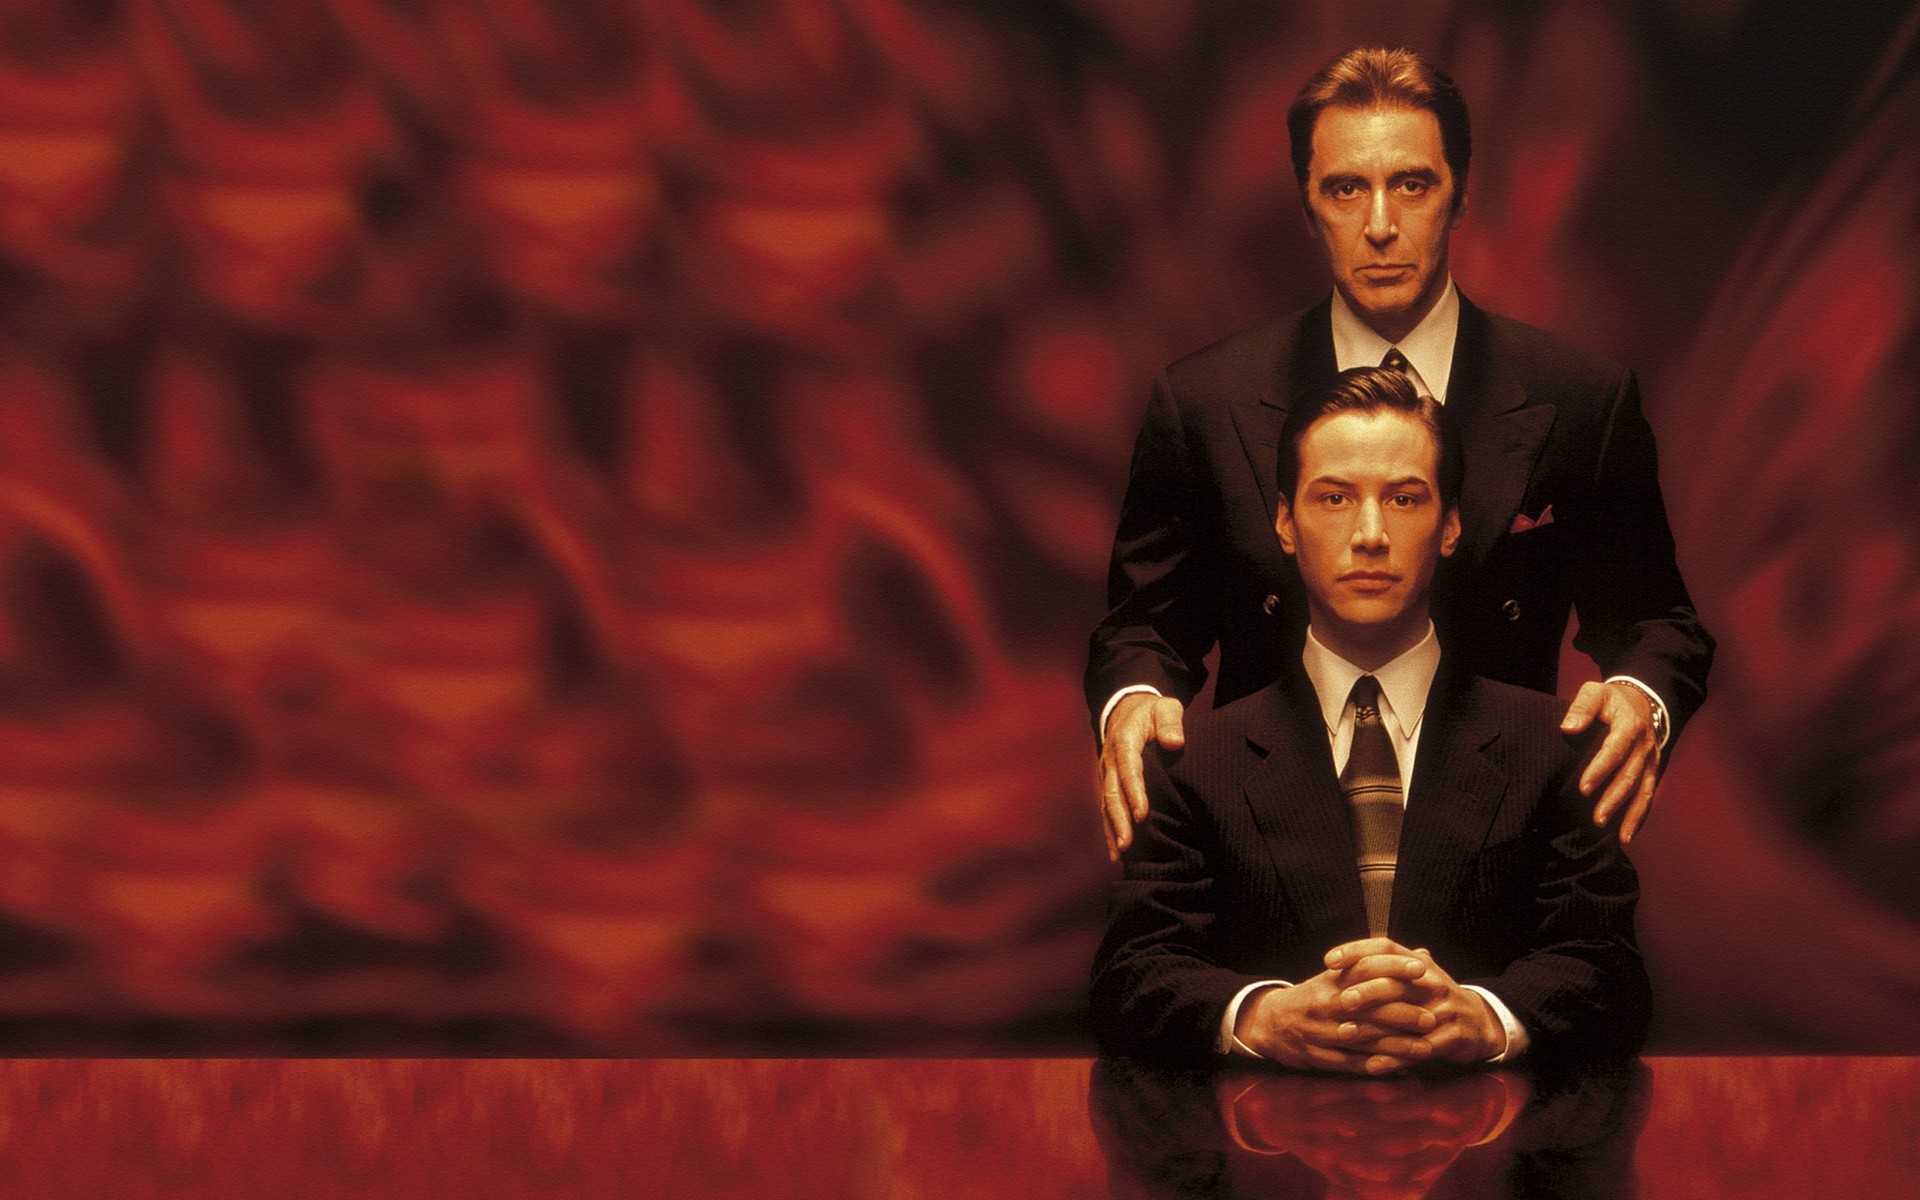 People 1920x1200 men actor film stills suits tie Al Pacino Keanu Reeves fire devil Satan burning movie poster looking at viewer The Devil's Advocate (Movie) red background